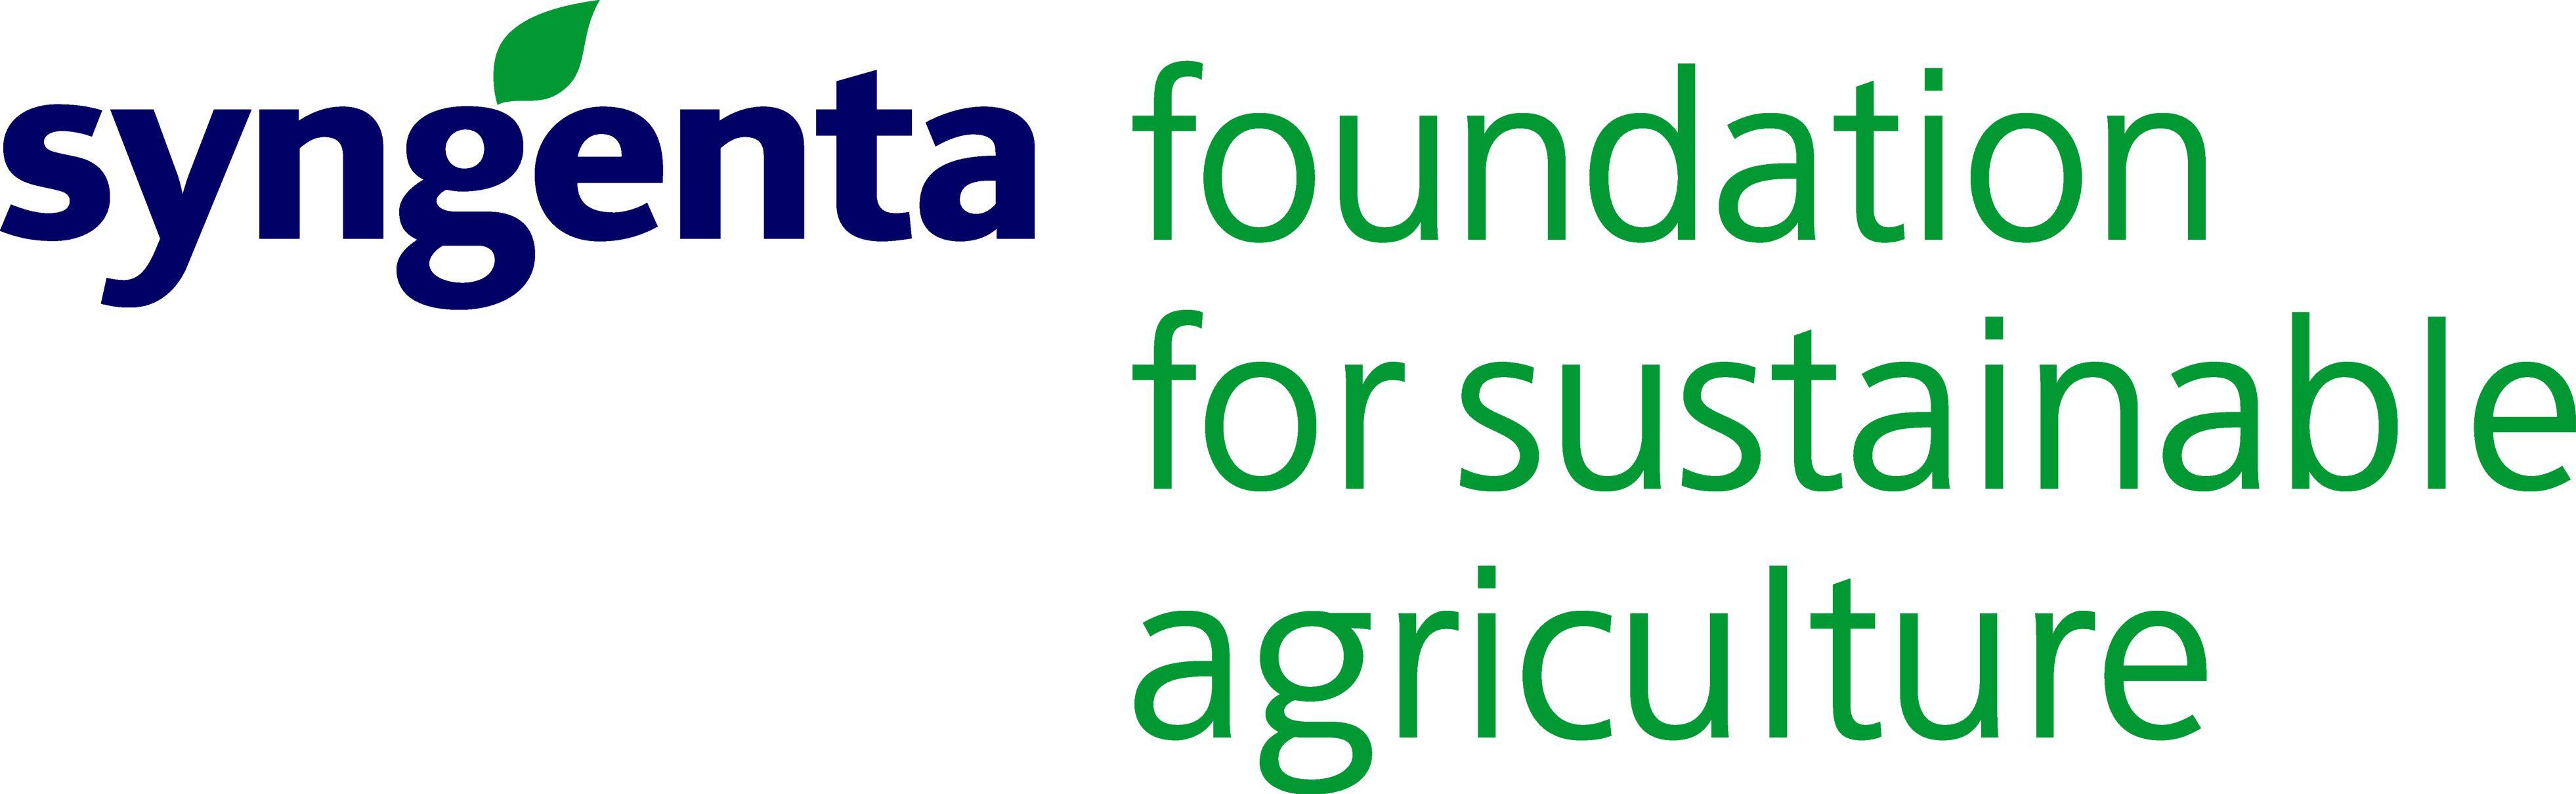 Syngenta Logo - Syngenta Foundation for Sustainable Agriculture | cinfo